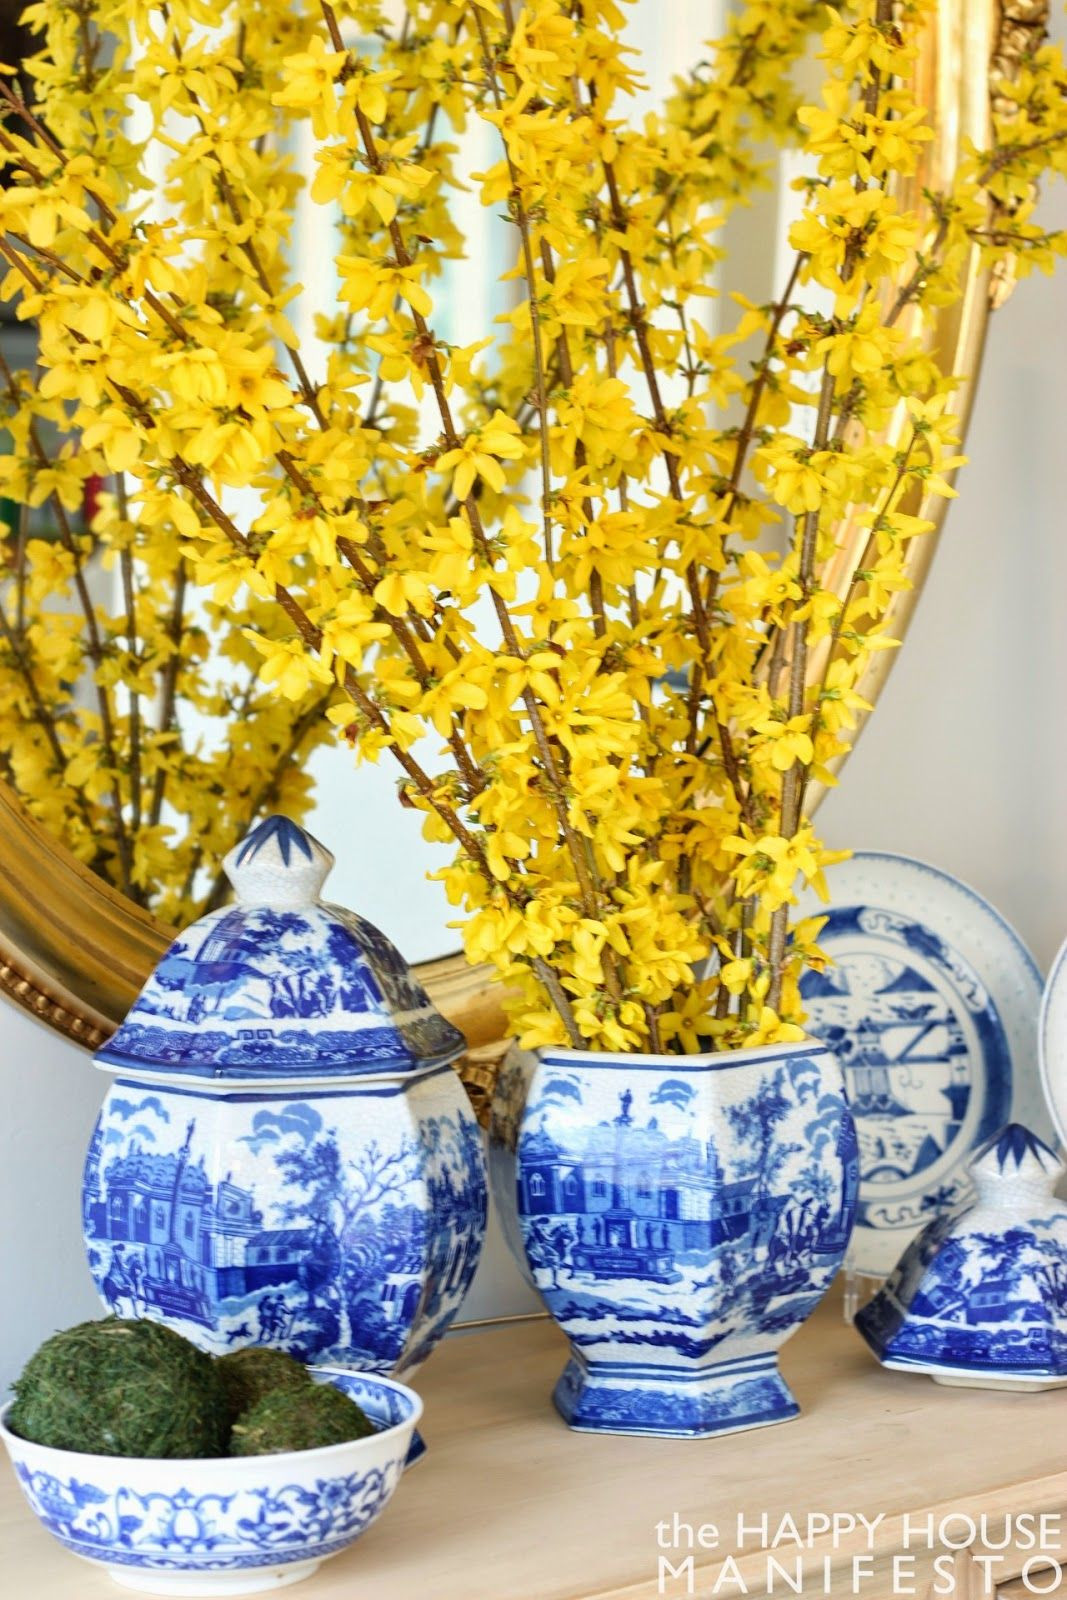 29 Trendy Ralph Lauren Blue and White Vase 2022 free download ralph lauren blue and white vase of image result for flower arrangements in blue and white ceramic jars with image result for flower arrangements in blue and white ceramic jars